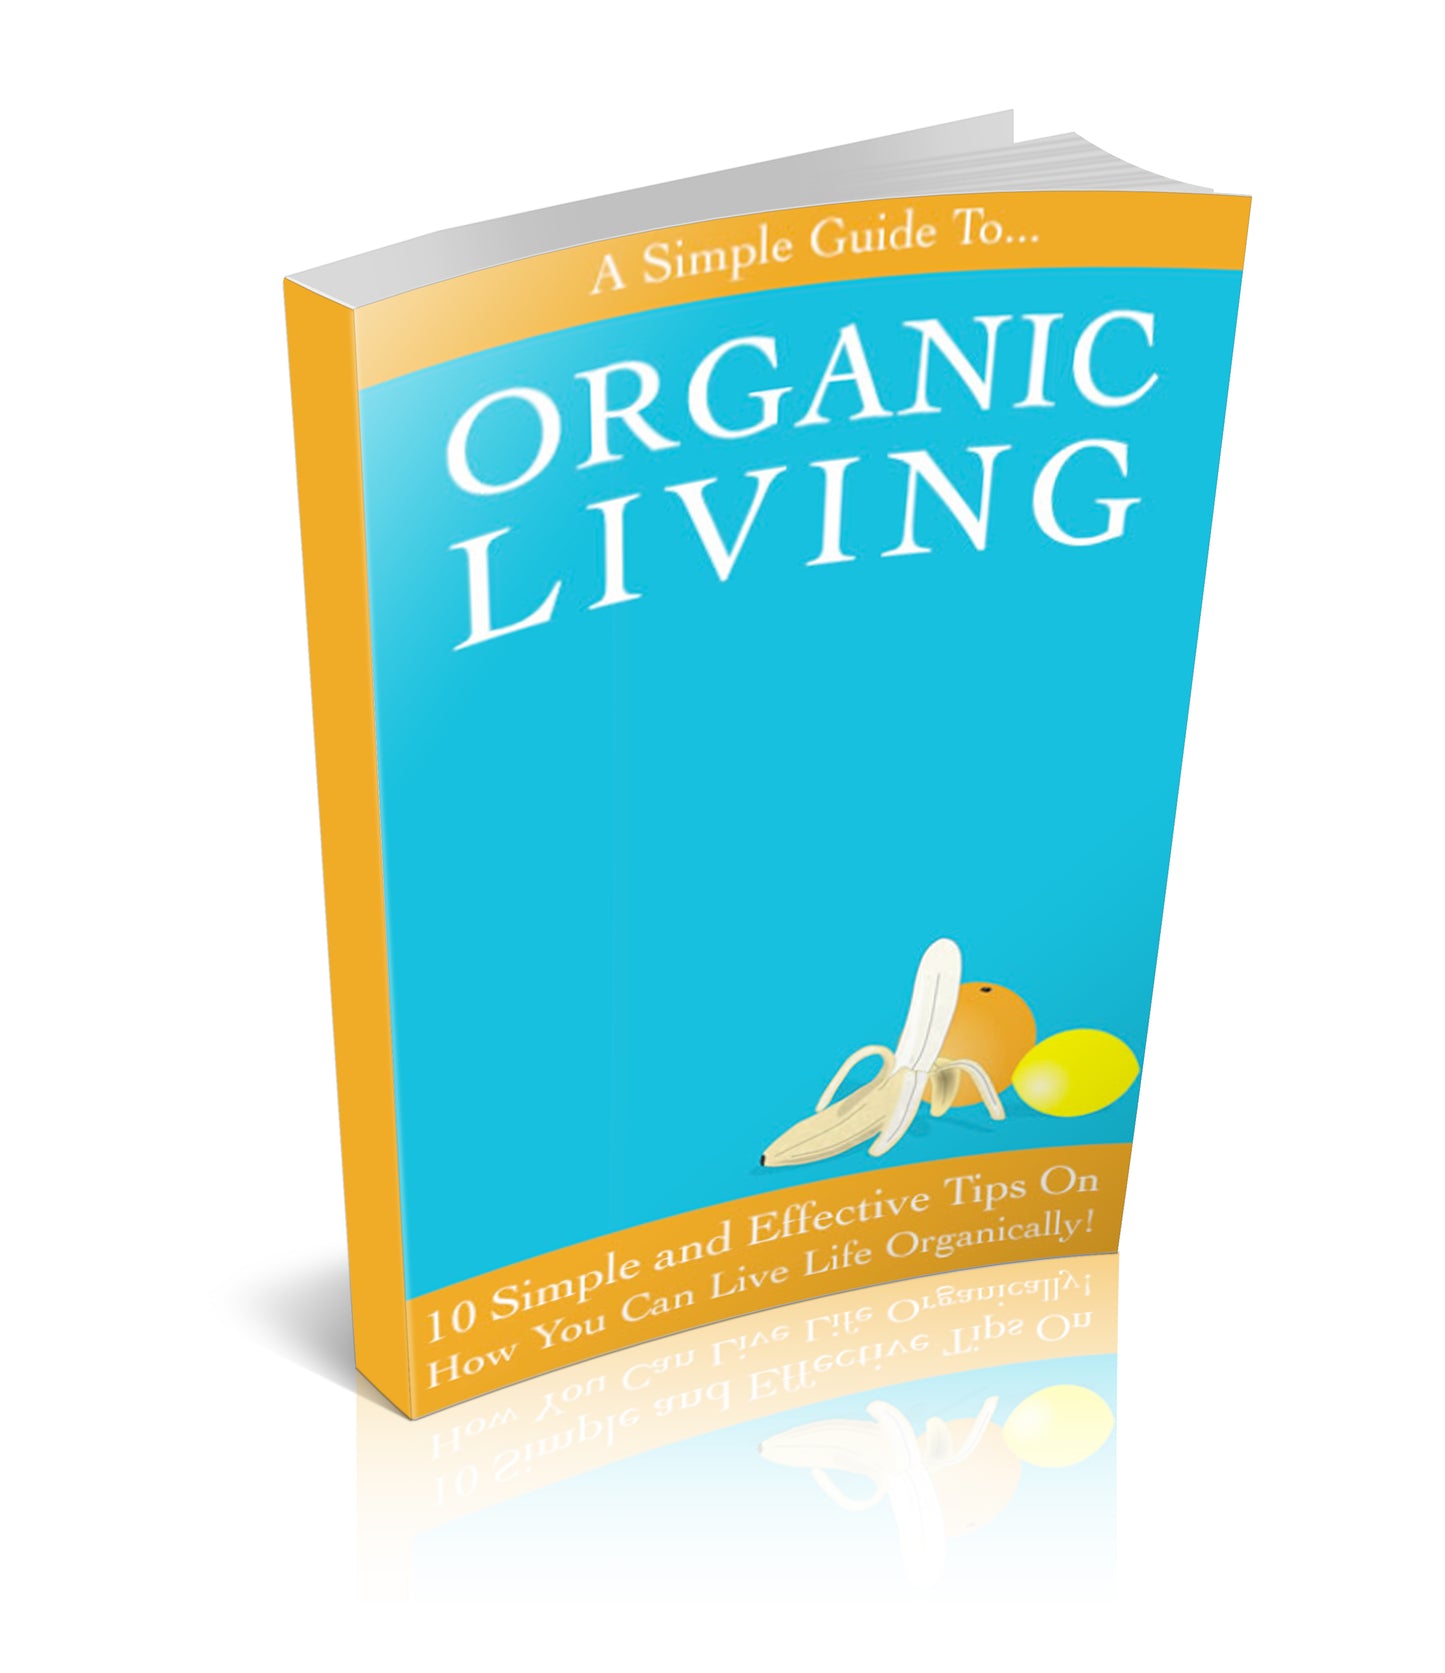 A Simple Guide To Organic Living